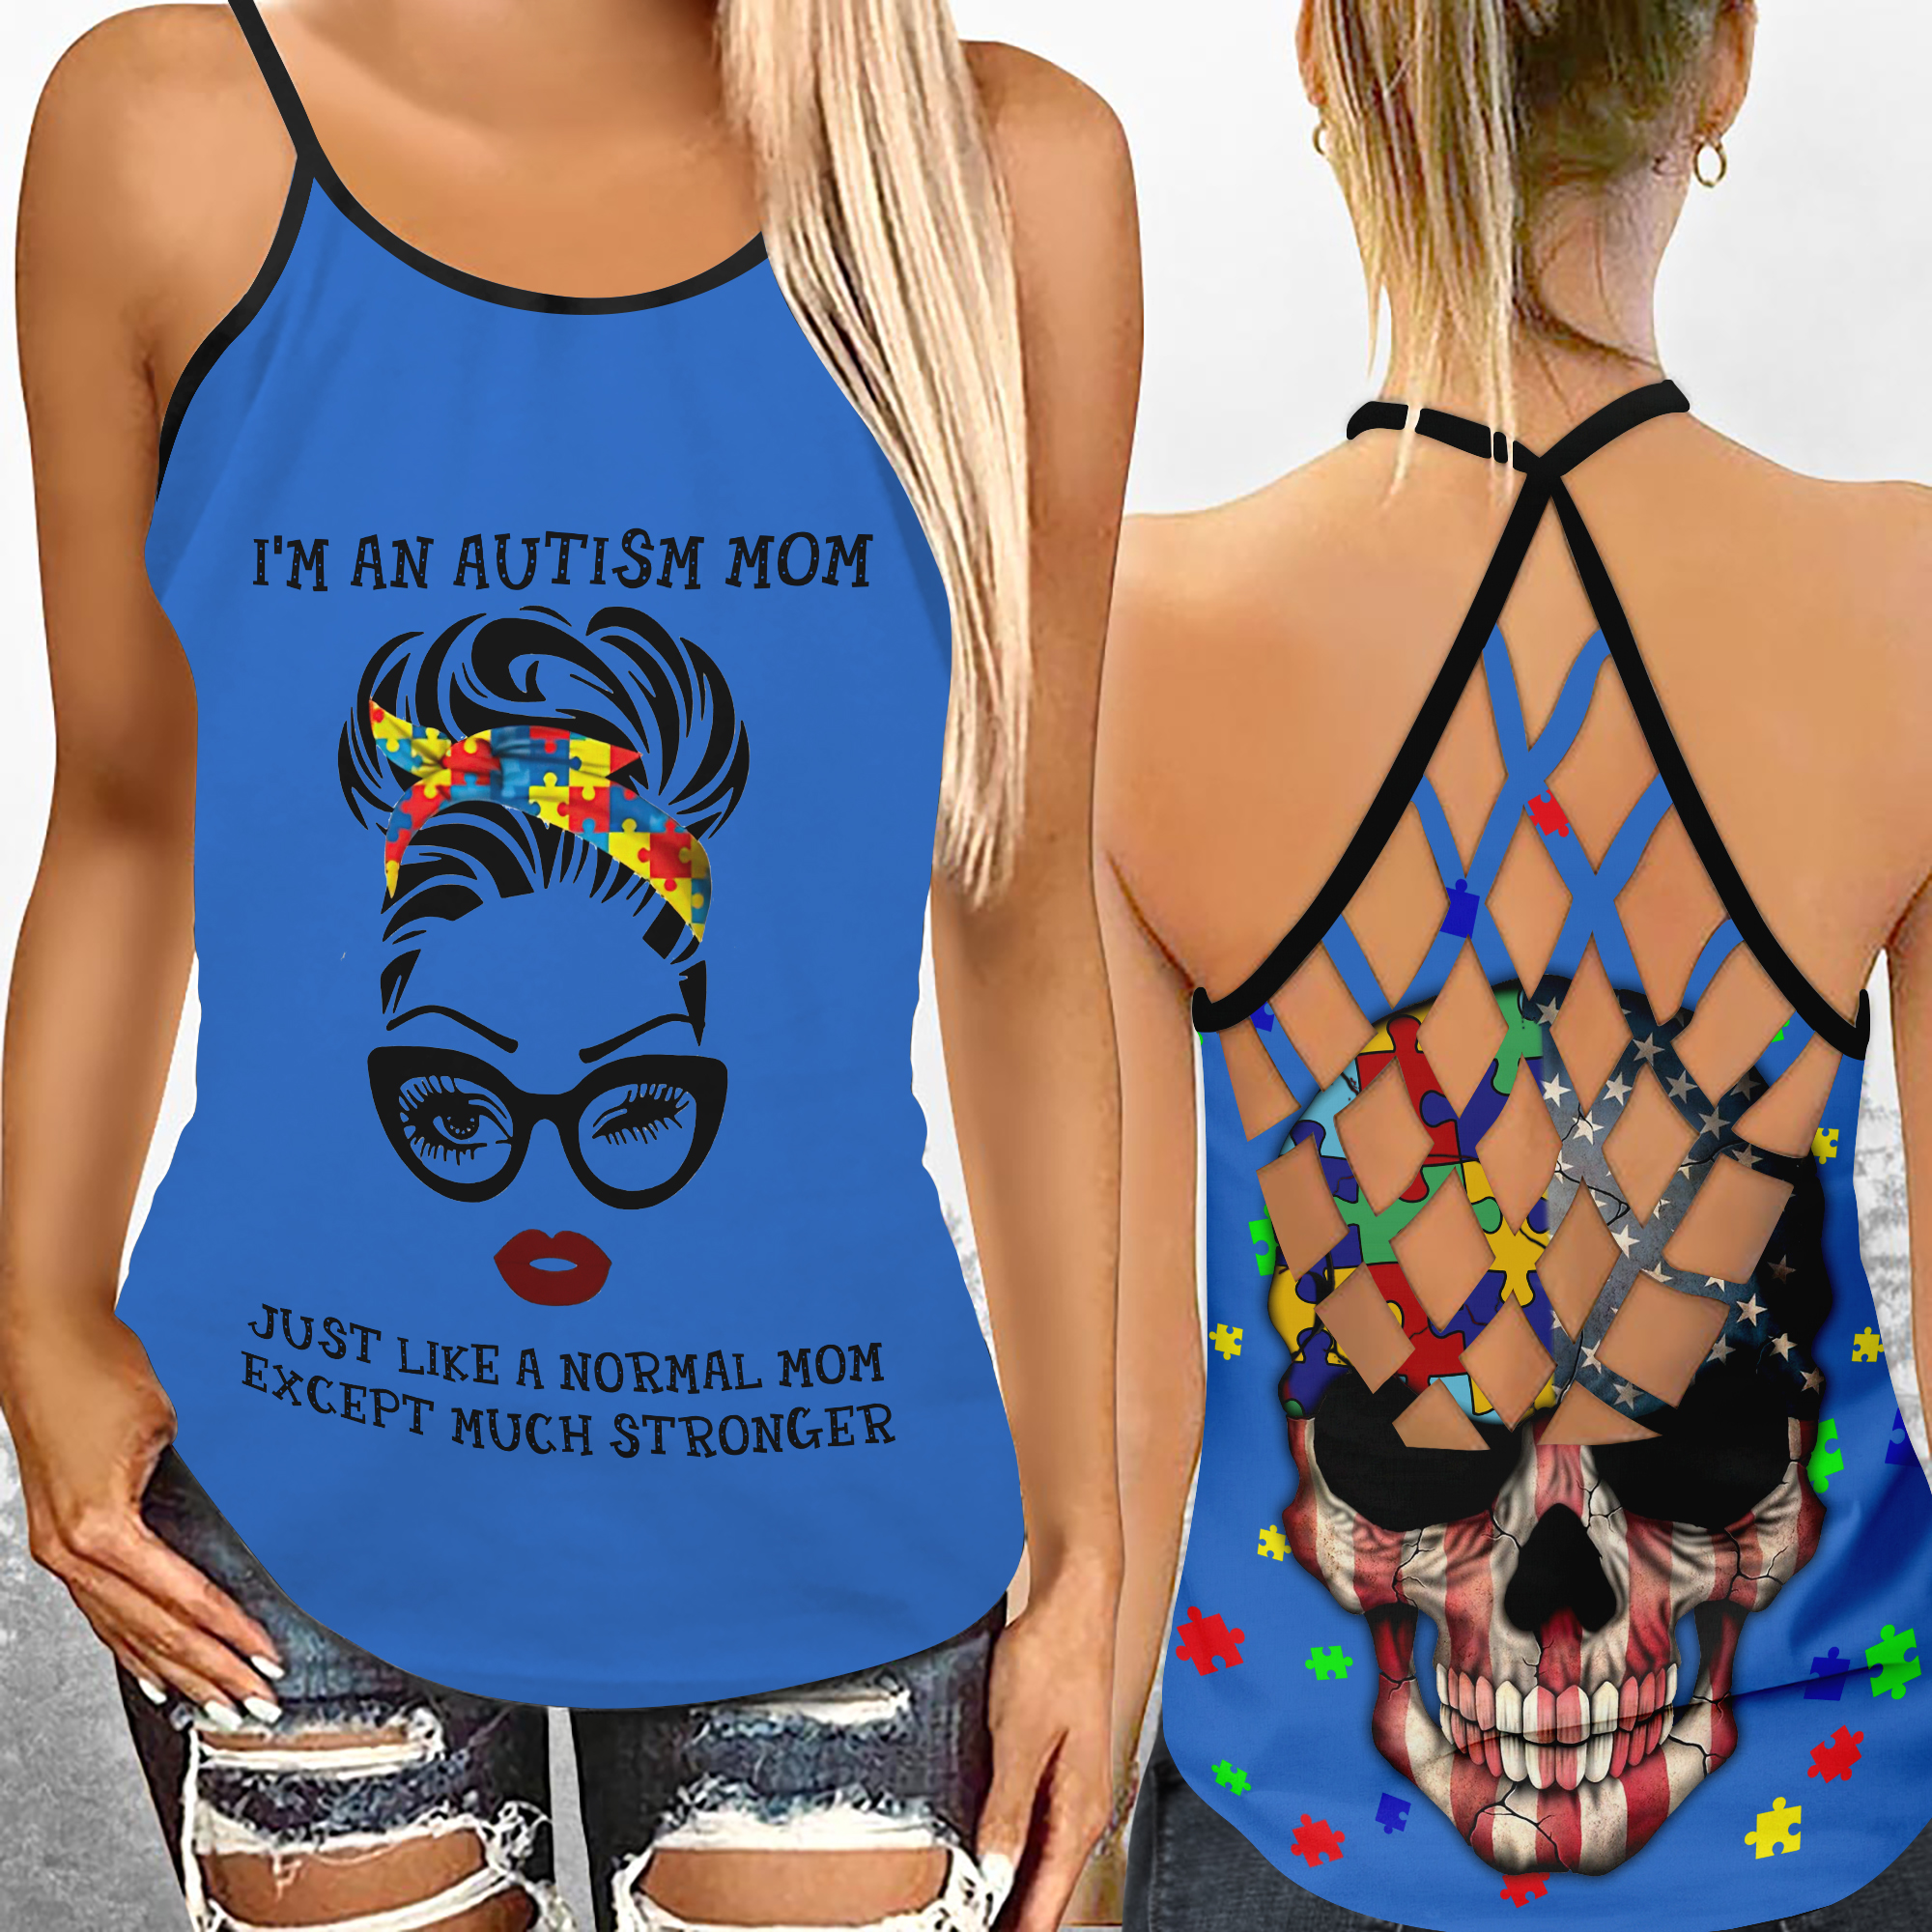 Im an autism mom criss cross open back camisole tank top